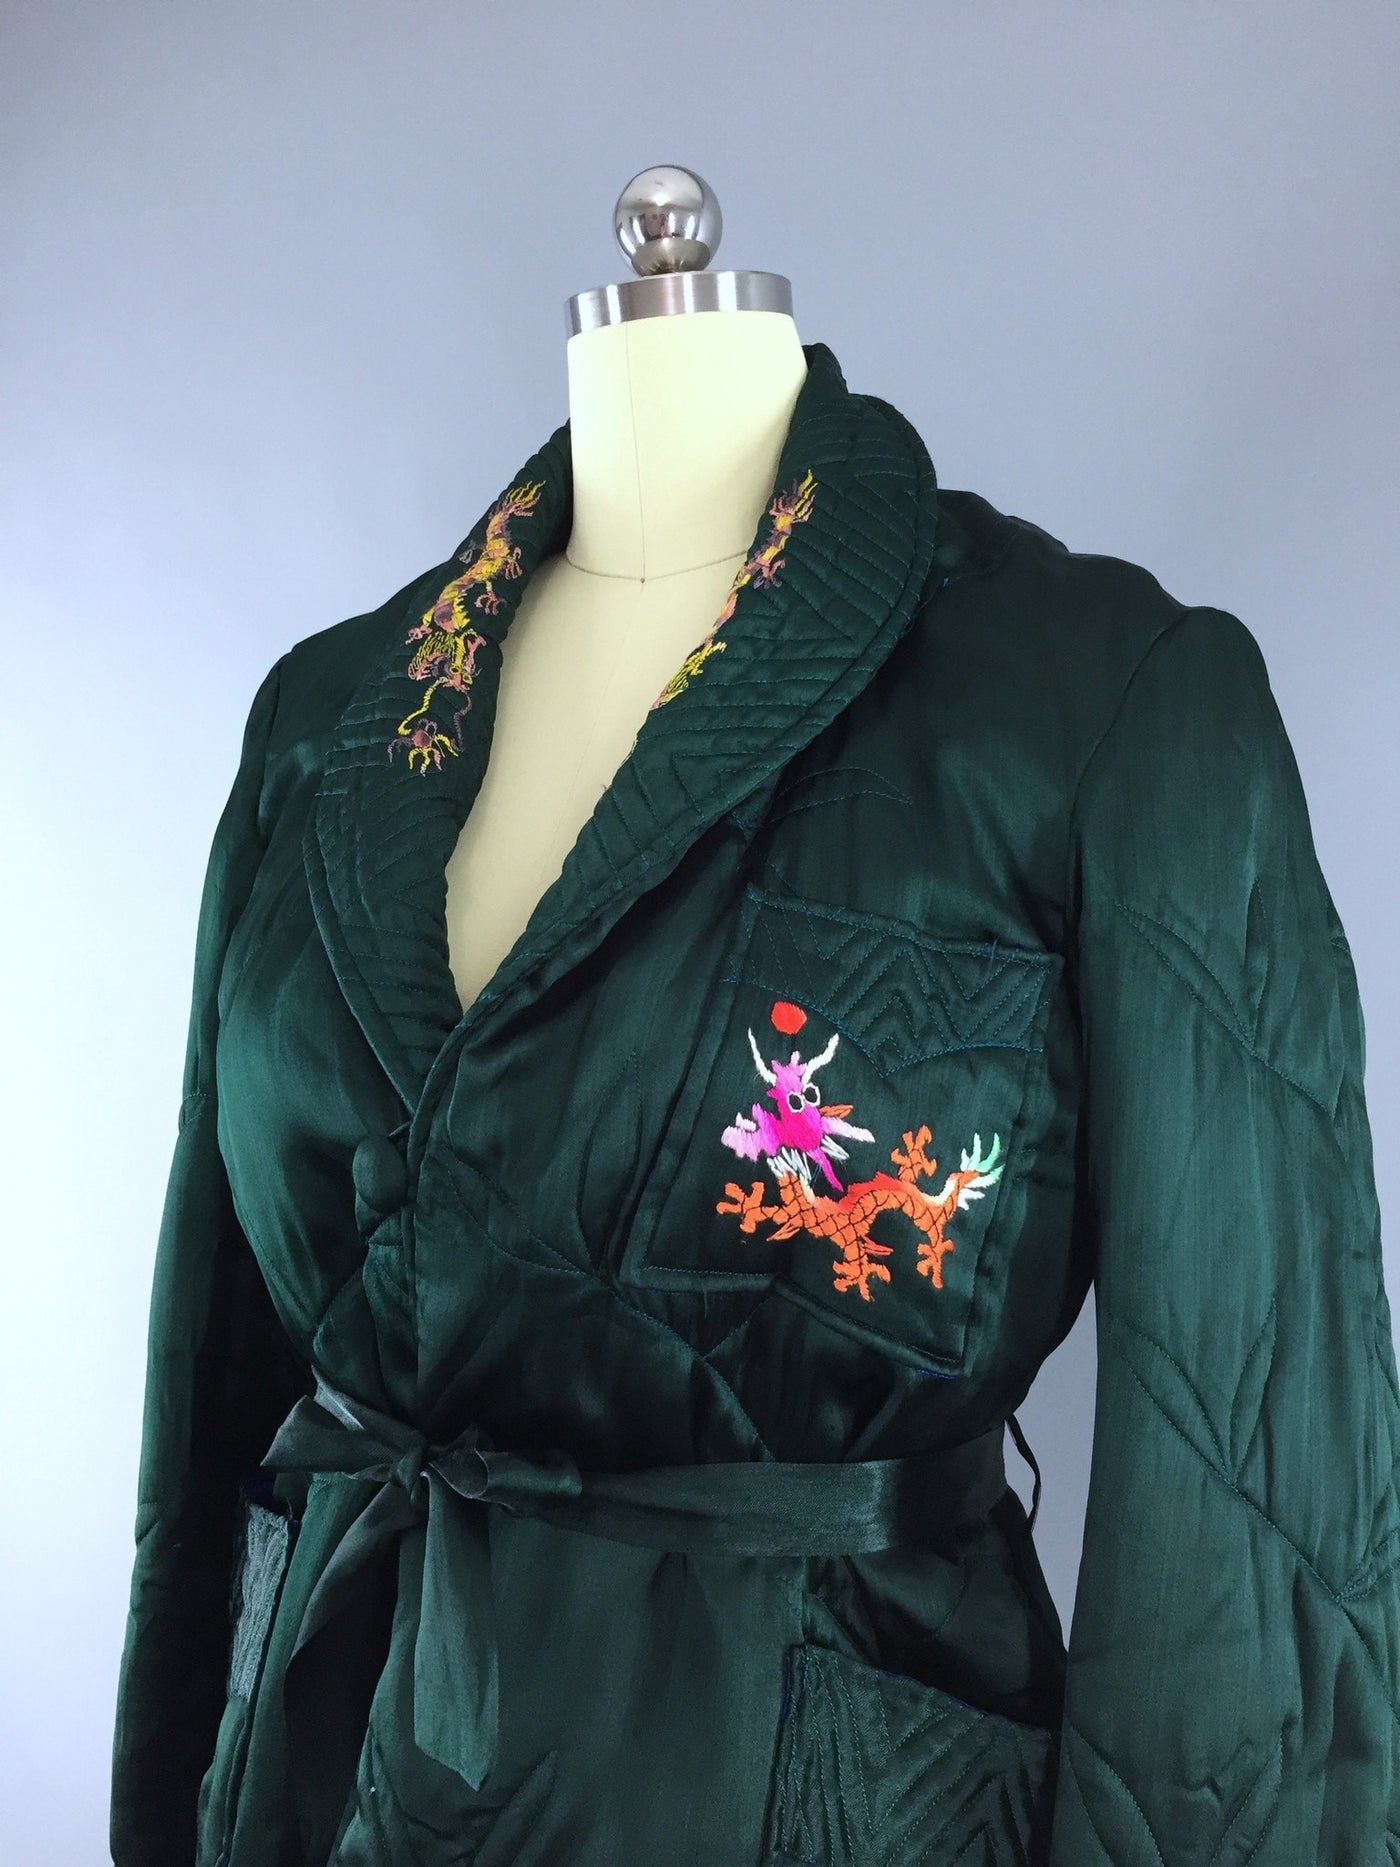 Vintage 1930s-1940s Satin Bed Jacket / Embroidered Dragons - ThisBlueBird